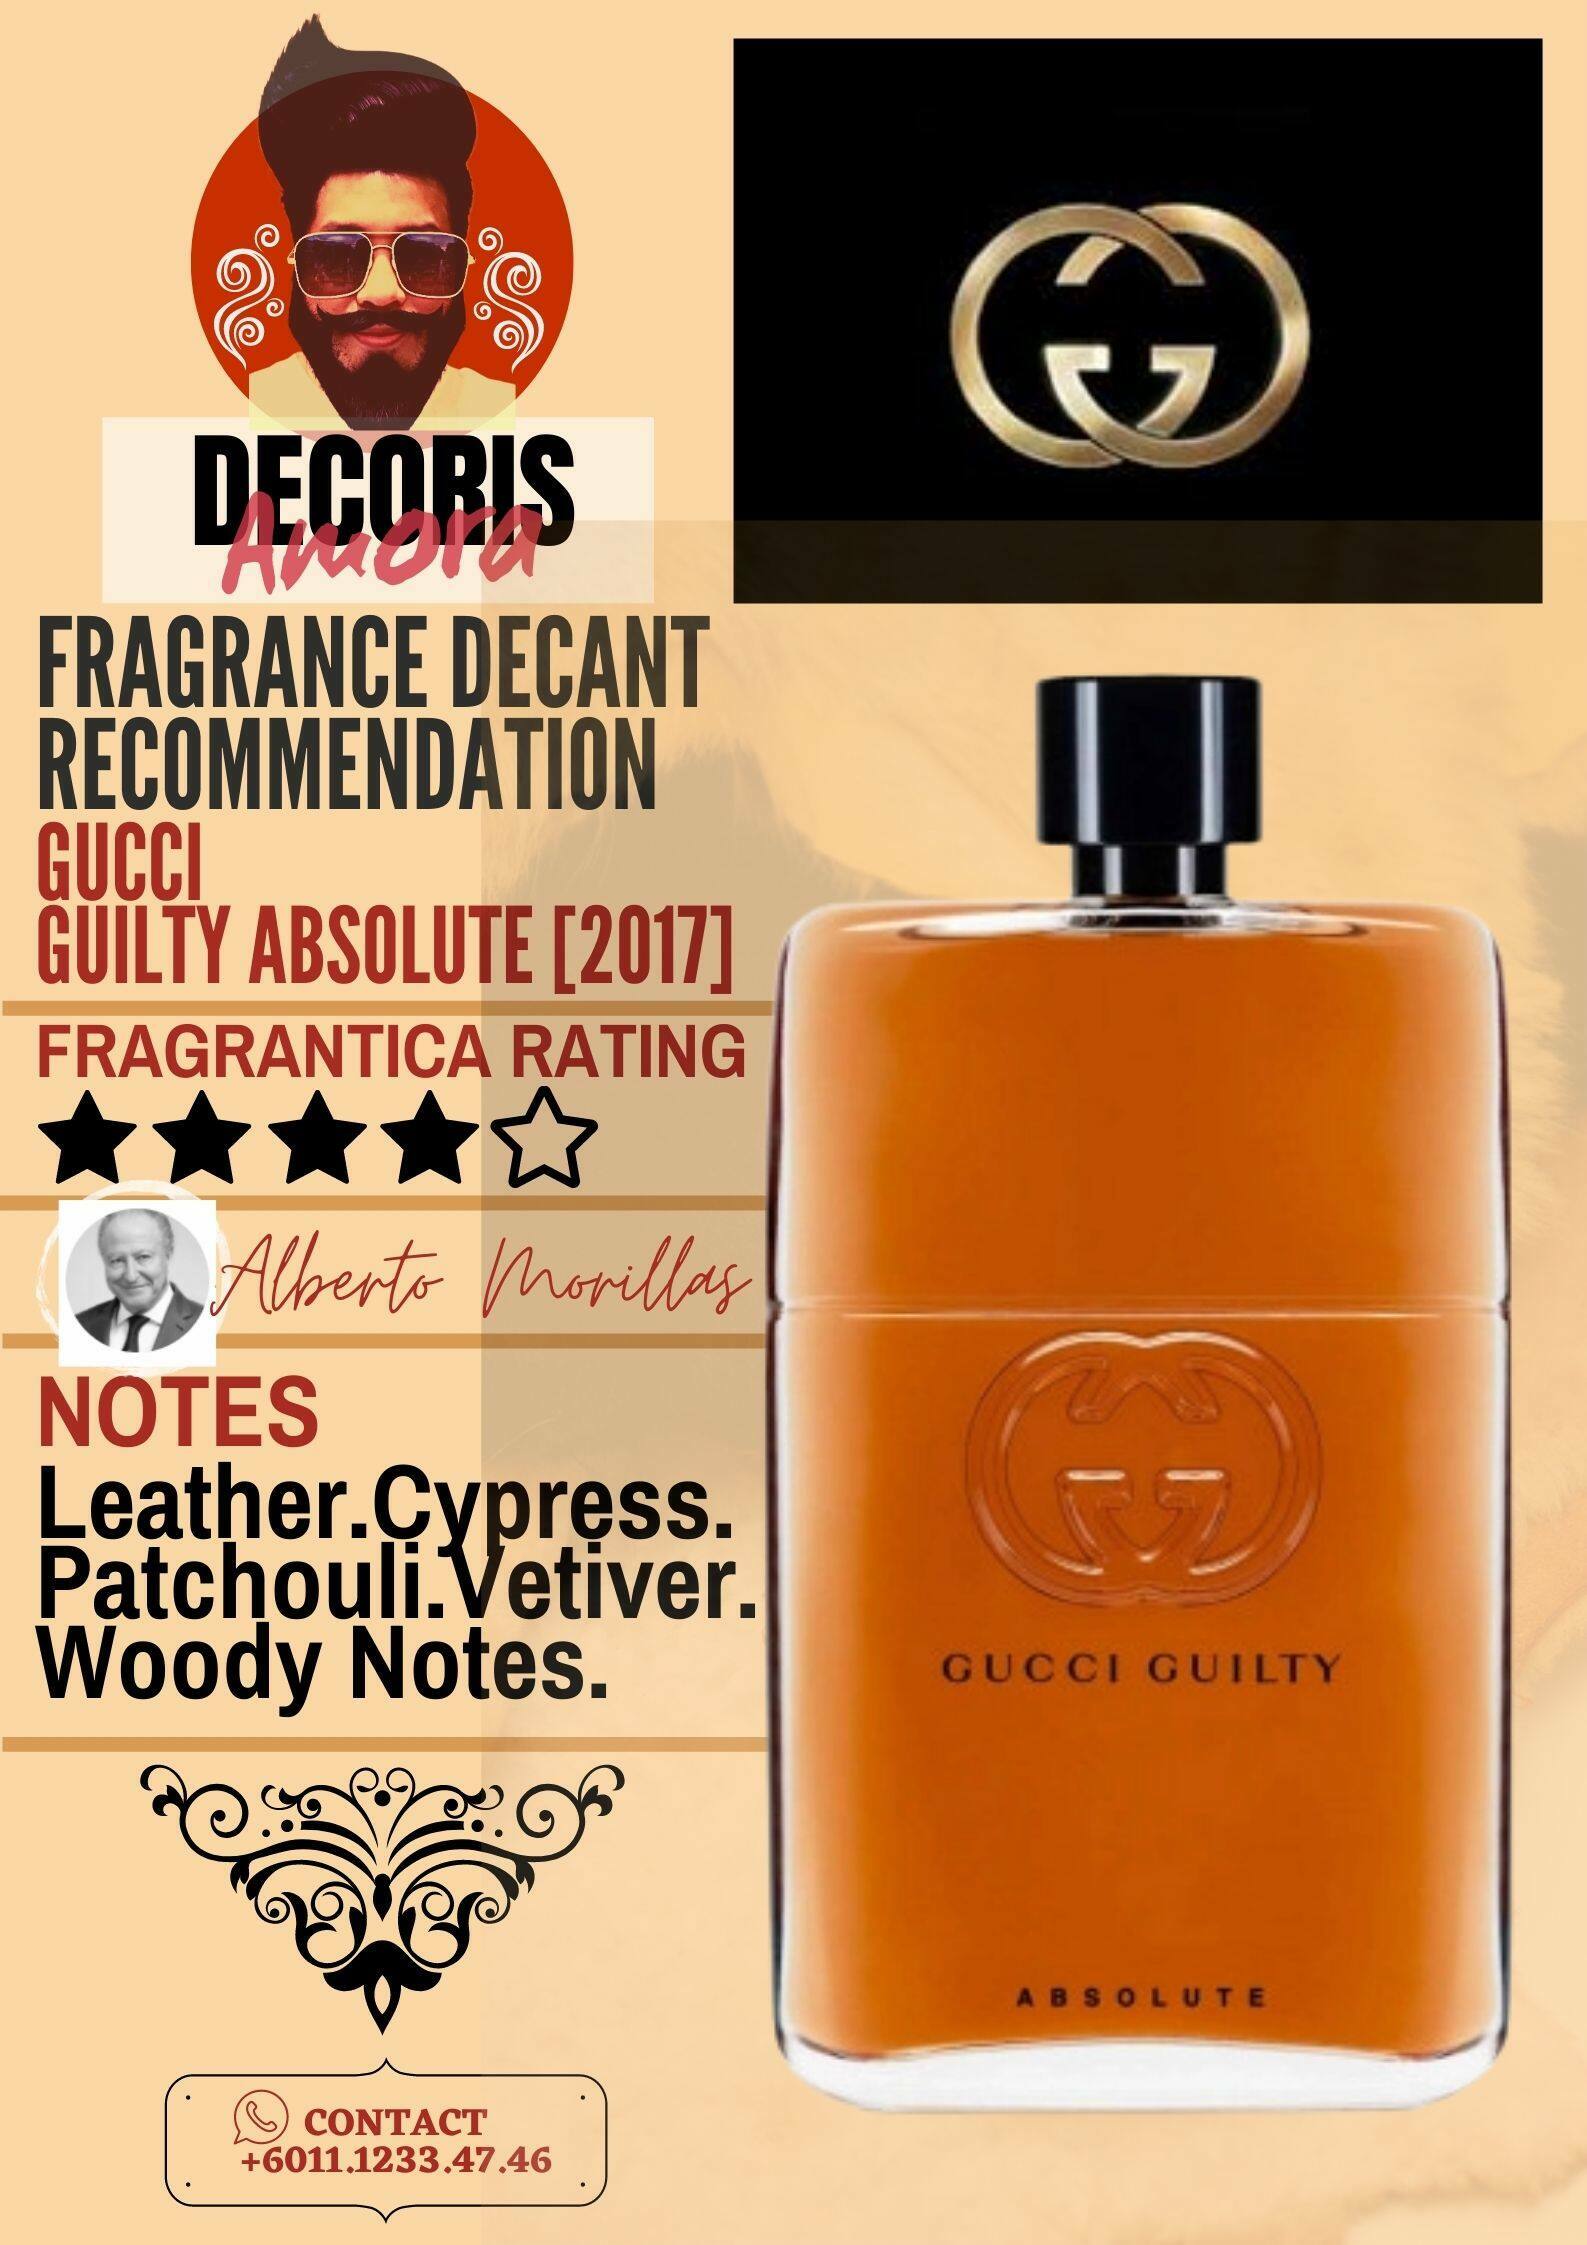 Gucci Guilty Absolute - Perfume Decant – Decoris Amora Perfume Decant